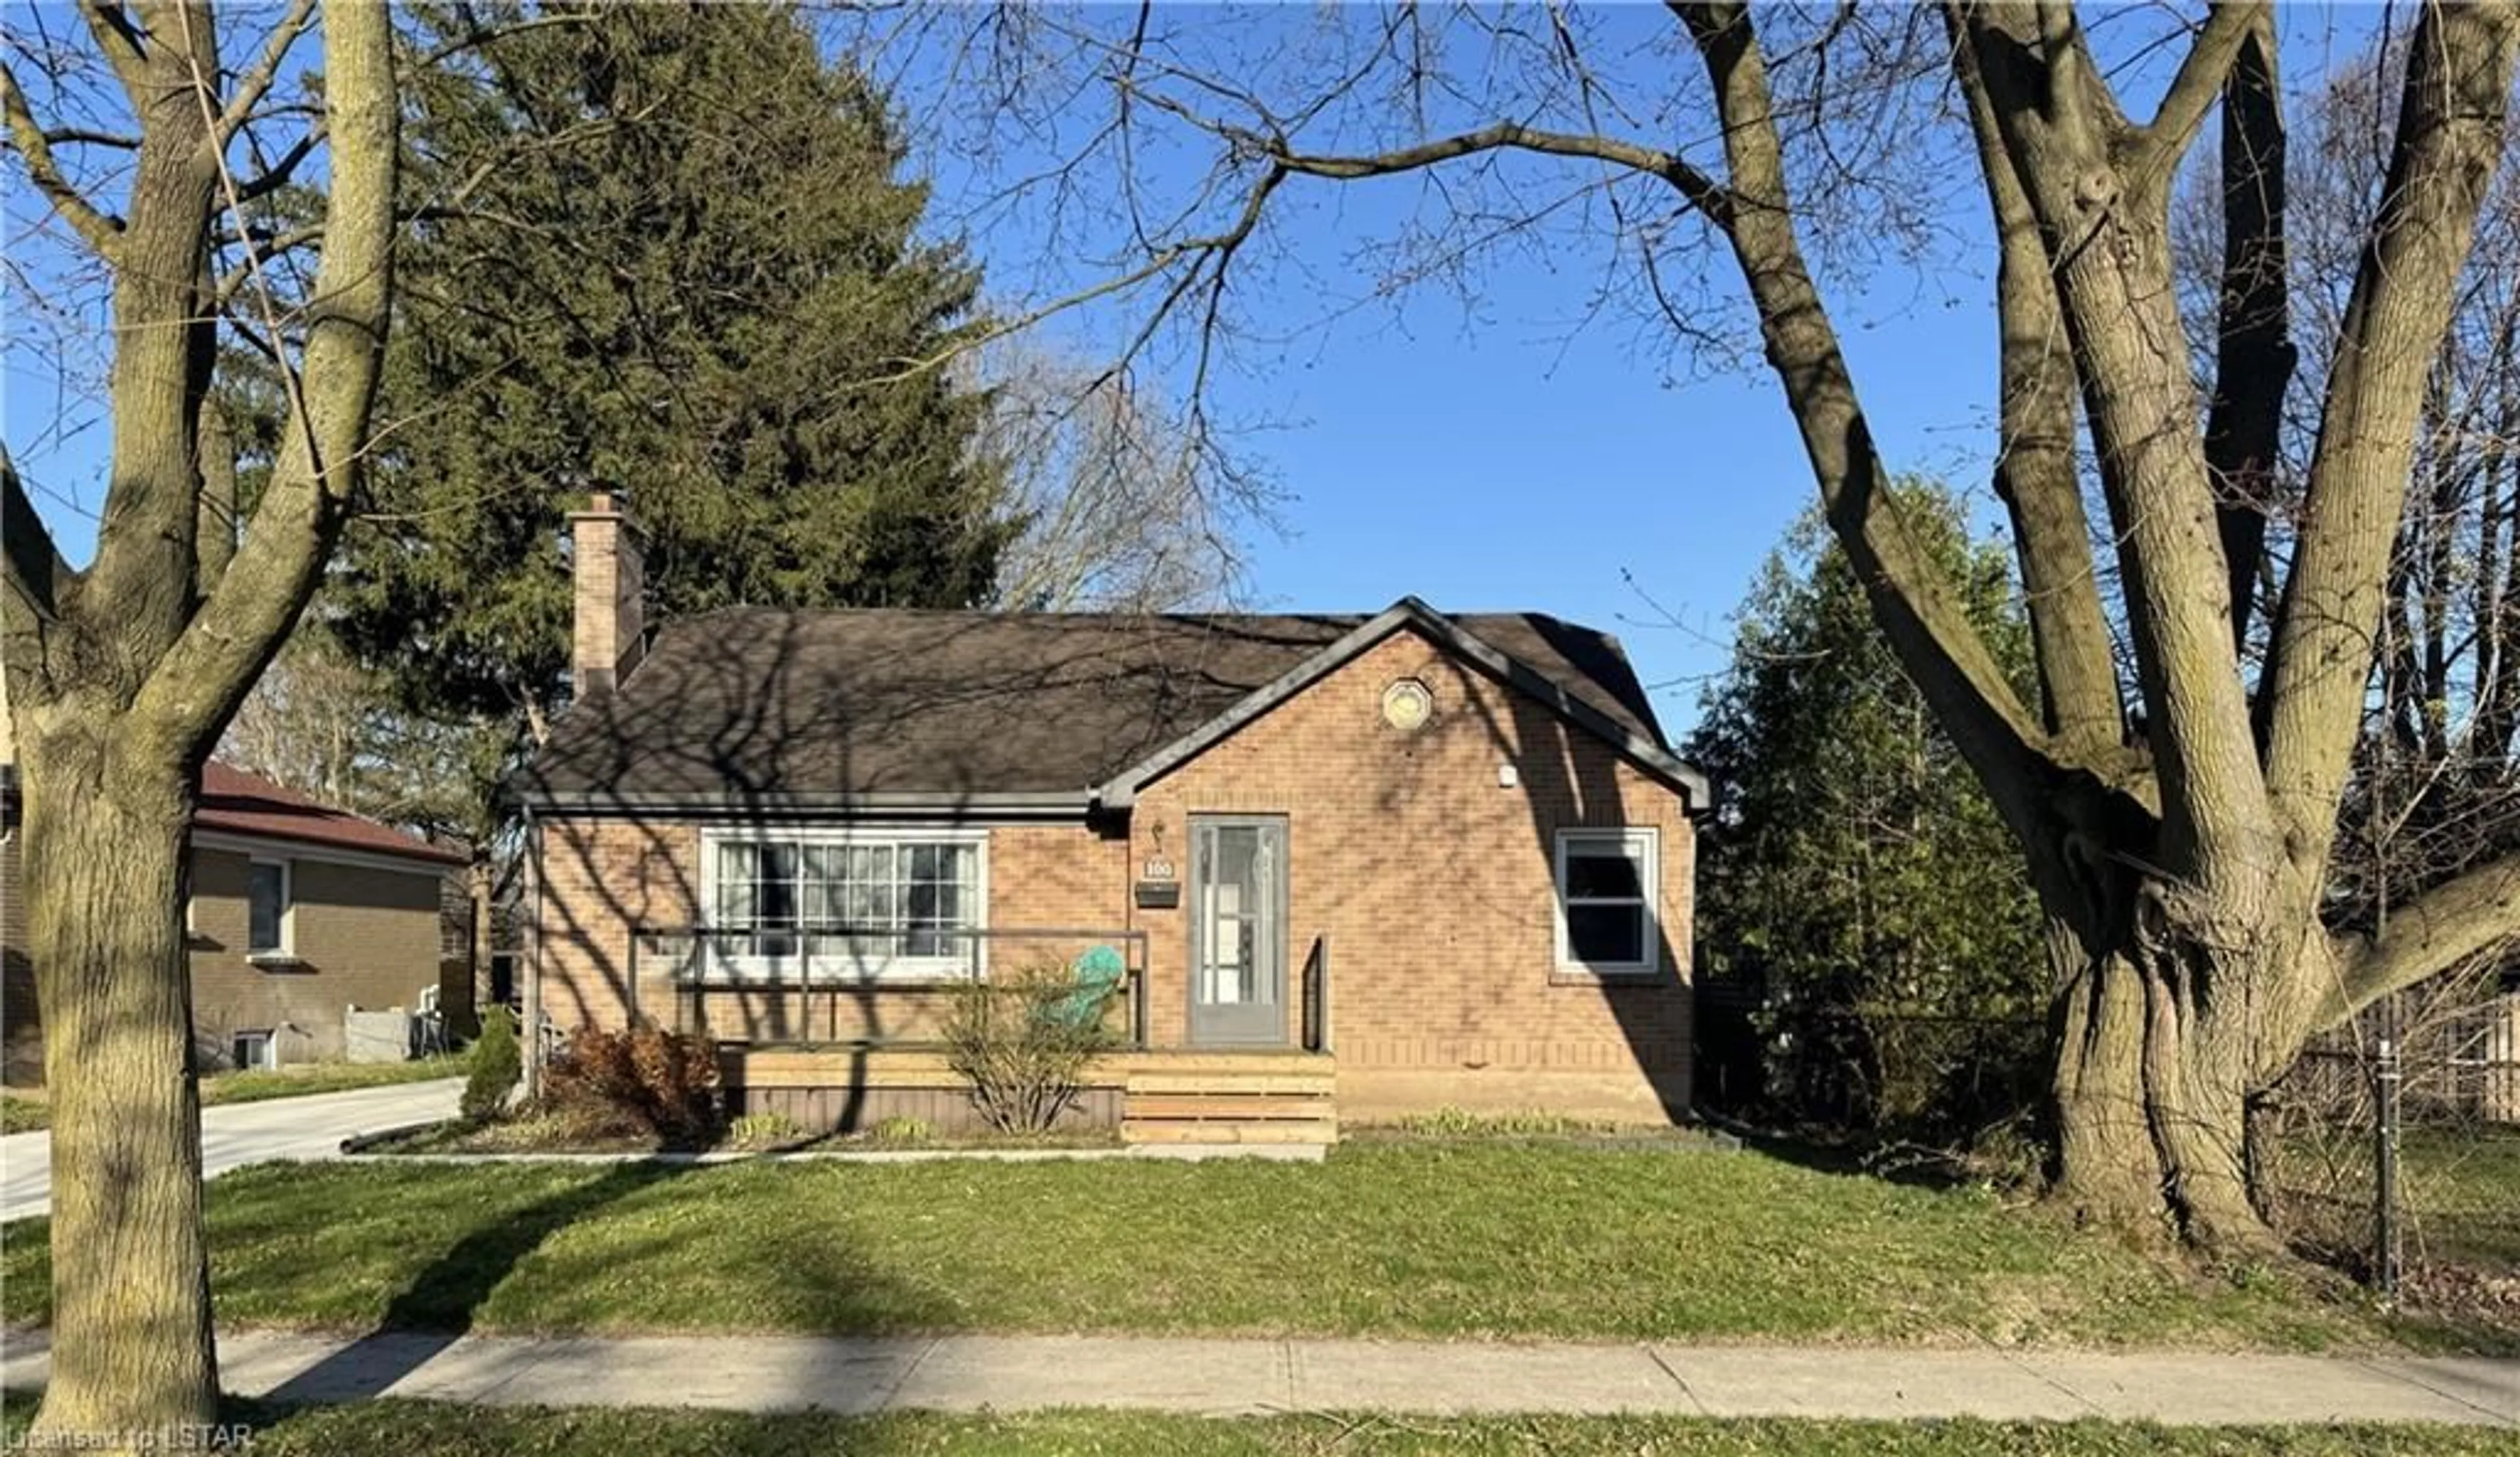 Home with brick exterior material for 100 Fairmont Ave, London Ontario N5W 1L9